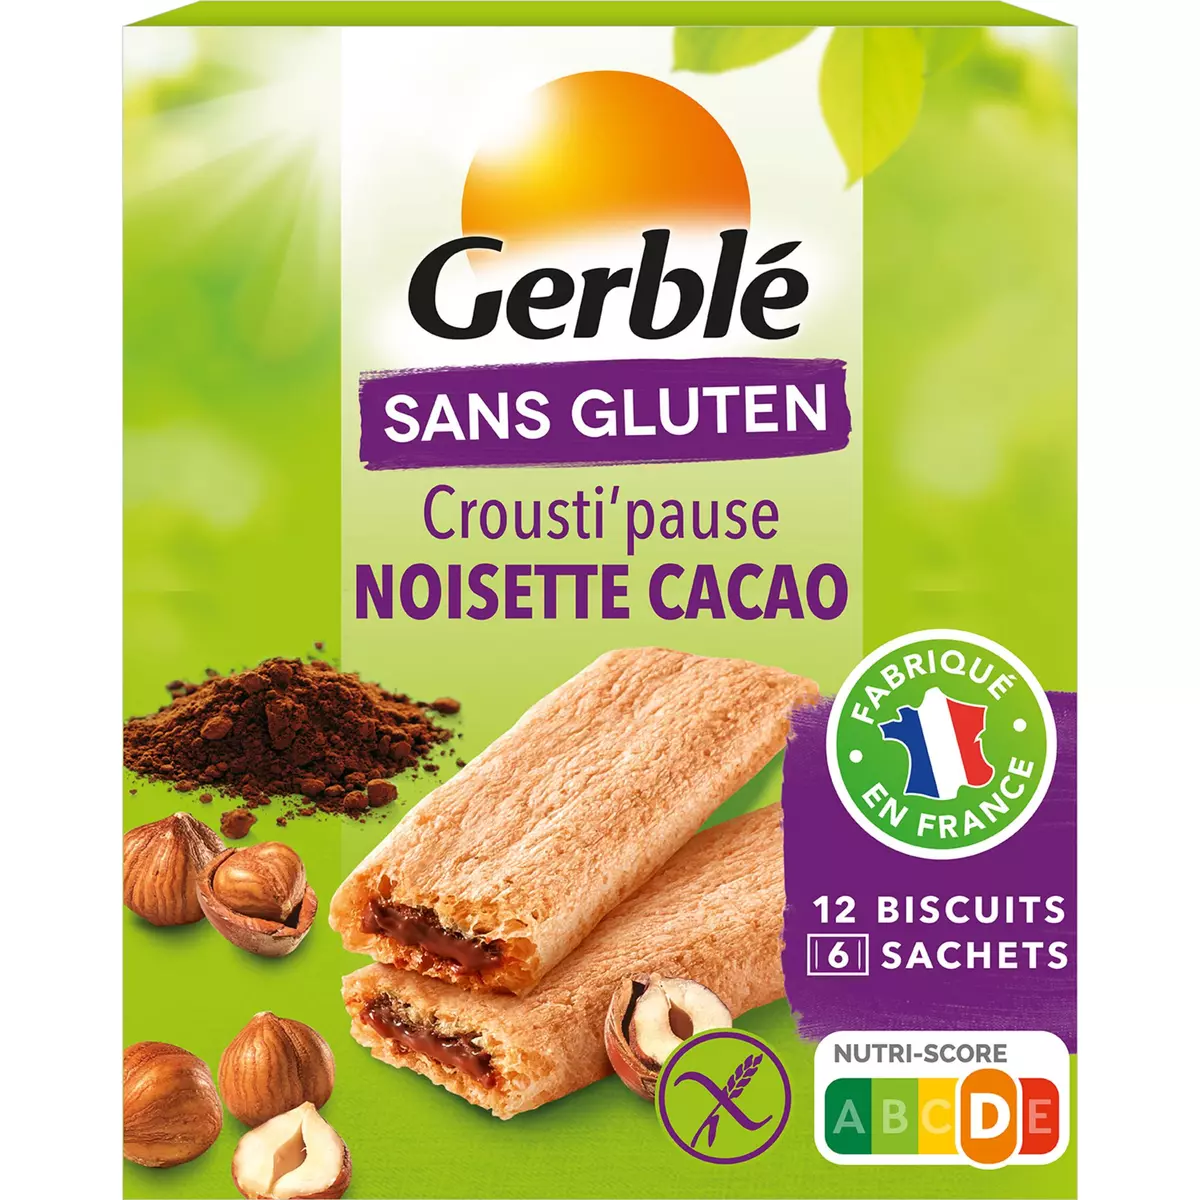 GERBLE Biscuits Crousti' pause cacao noisettes sans gluten sachets individuels 5x2 biscuits 125g